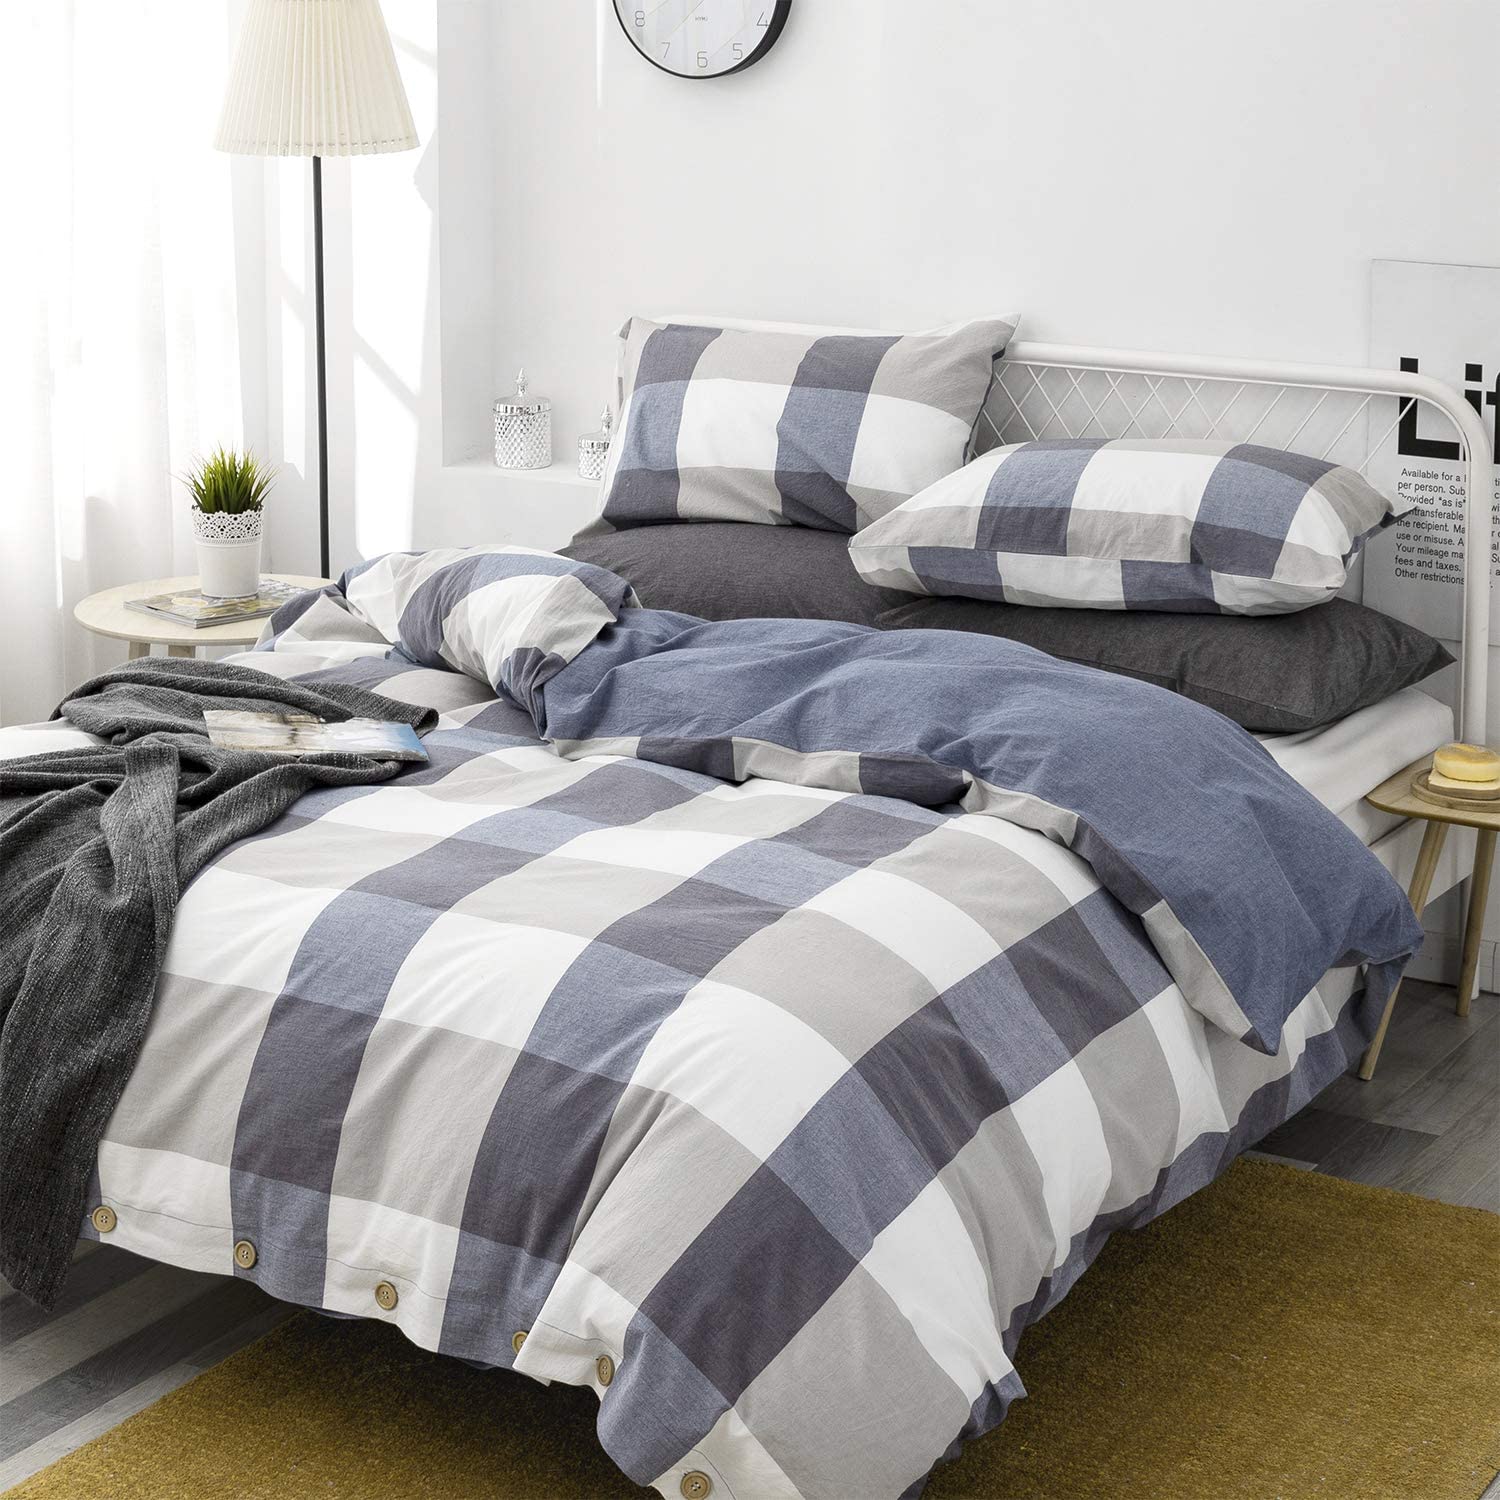 Price:$35.99 TEWENE Twin Duvet Cover, 100% Washed Cotton 400 Thread Count Duvet Cover Twin Size, 3 Piece Luxury Soft Bedding Set with Button Closure(Blue White Plaid, Twin) : Home & Kitchen